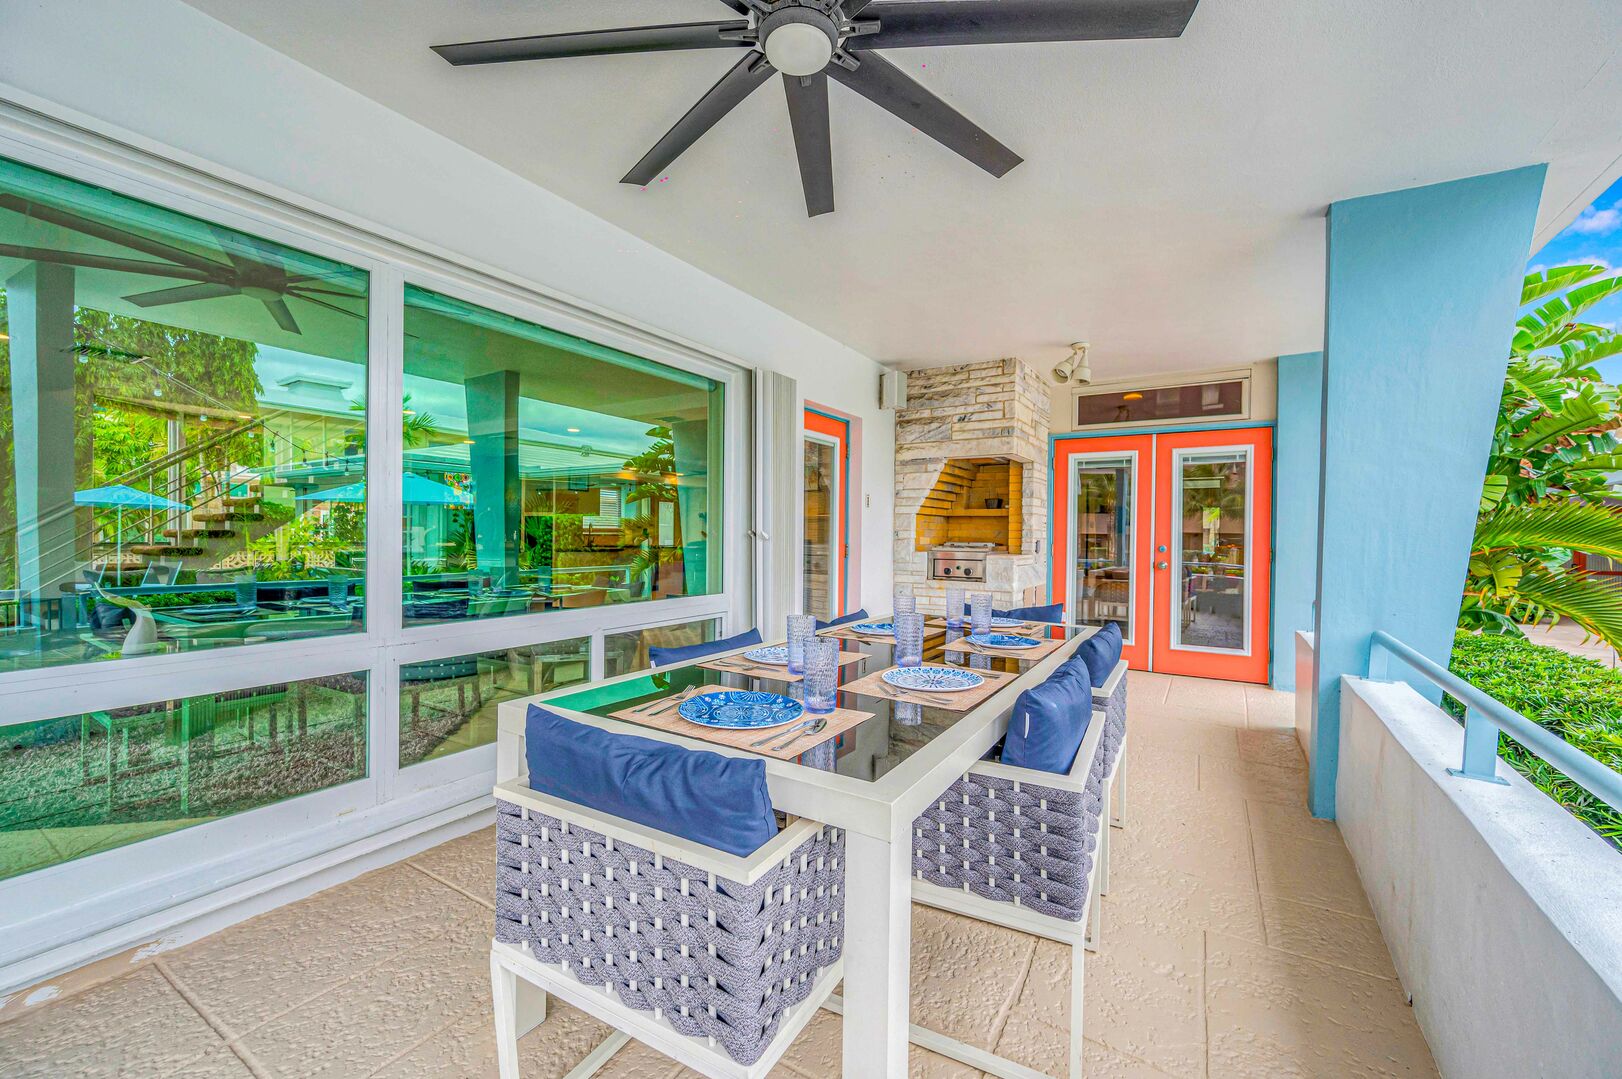 Private dining patio fit for six with pool and canal views.